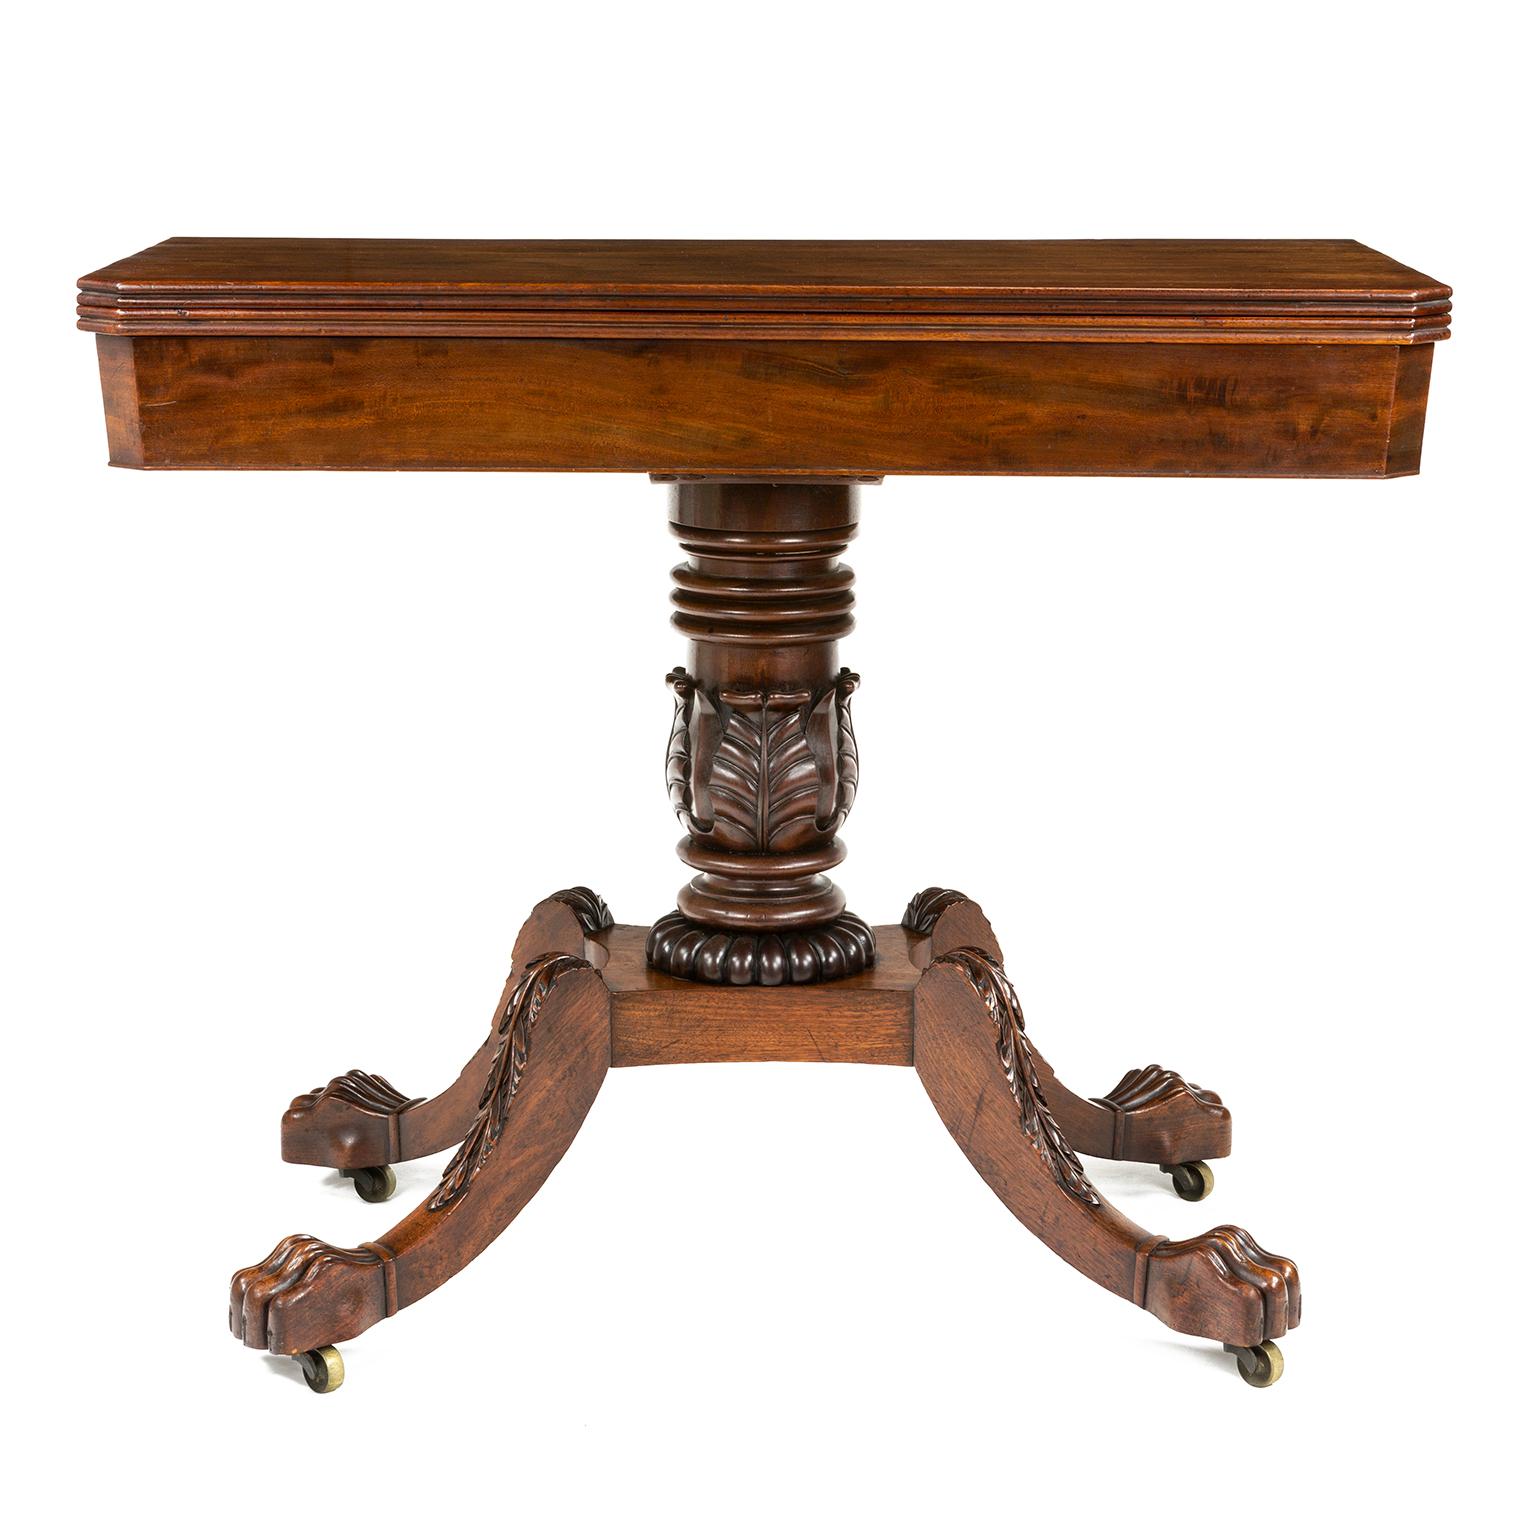 A fine quality rosewood Regency tea table accredited to Gillows, on a quatrefoil base with down swept legs decorated with acanthus leaf decoration, terminating in lion paw feet and castors.

Gillows of Lancaster and London, also known as Gillow &